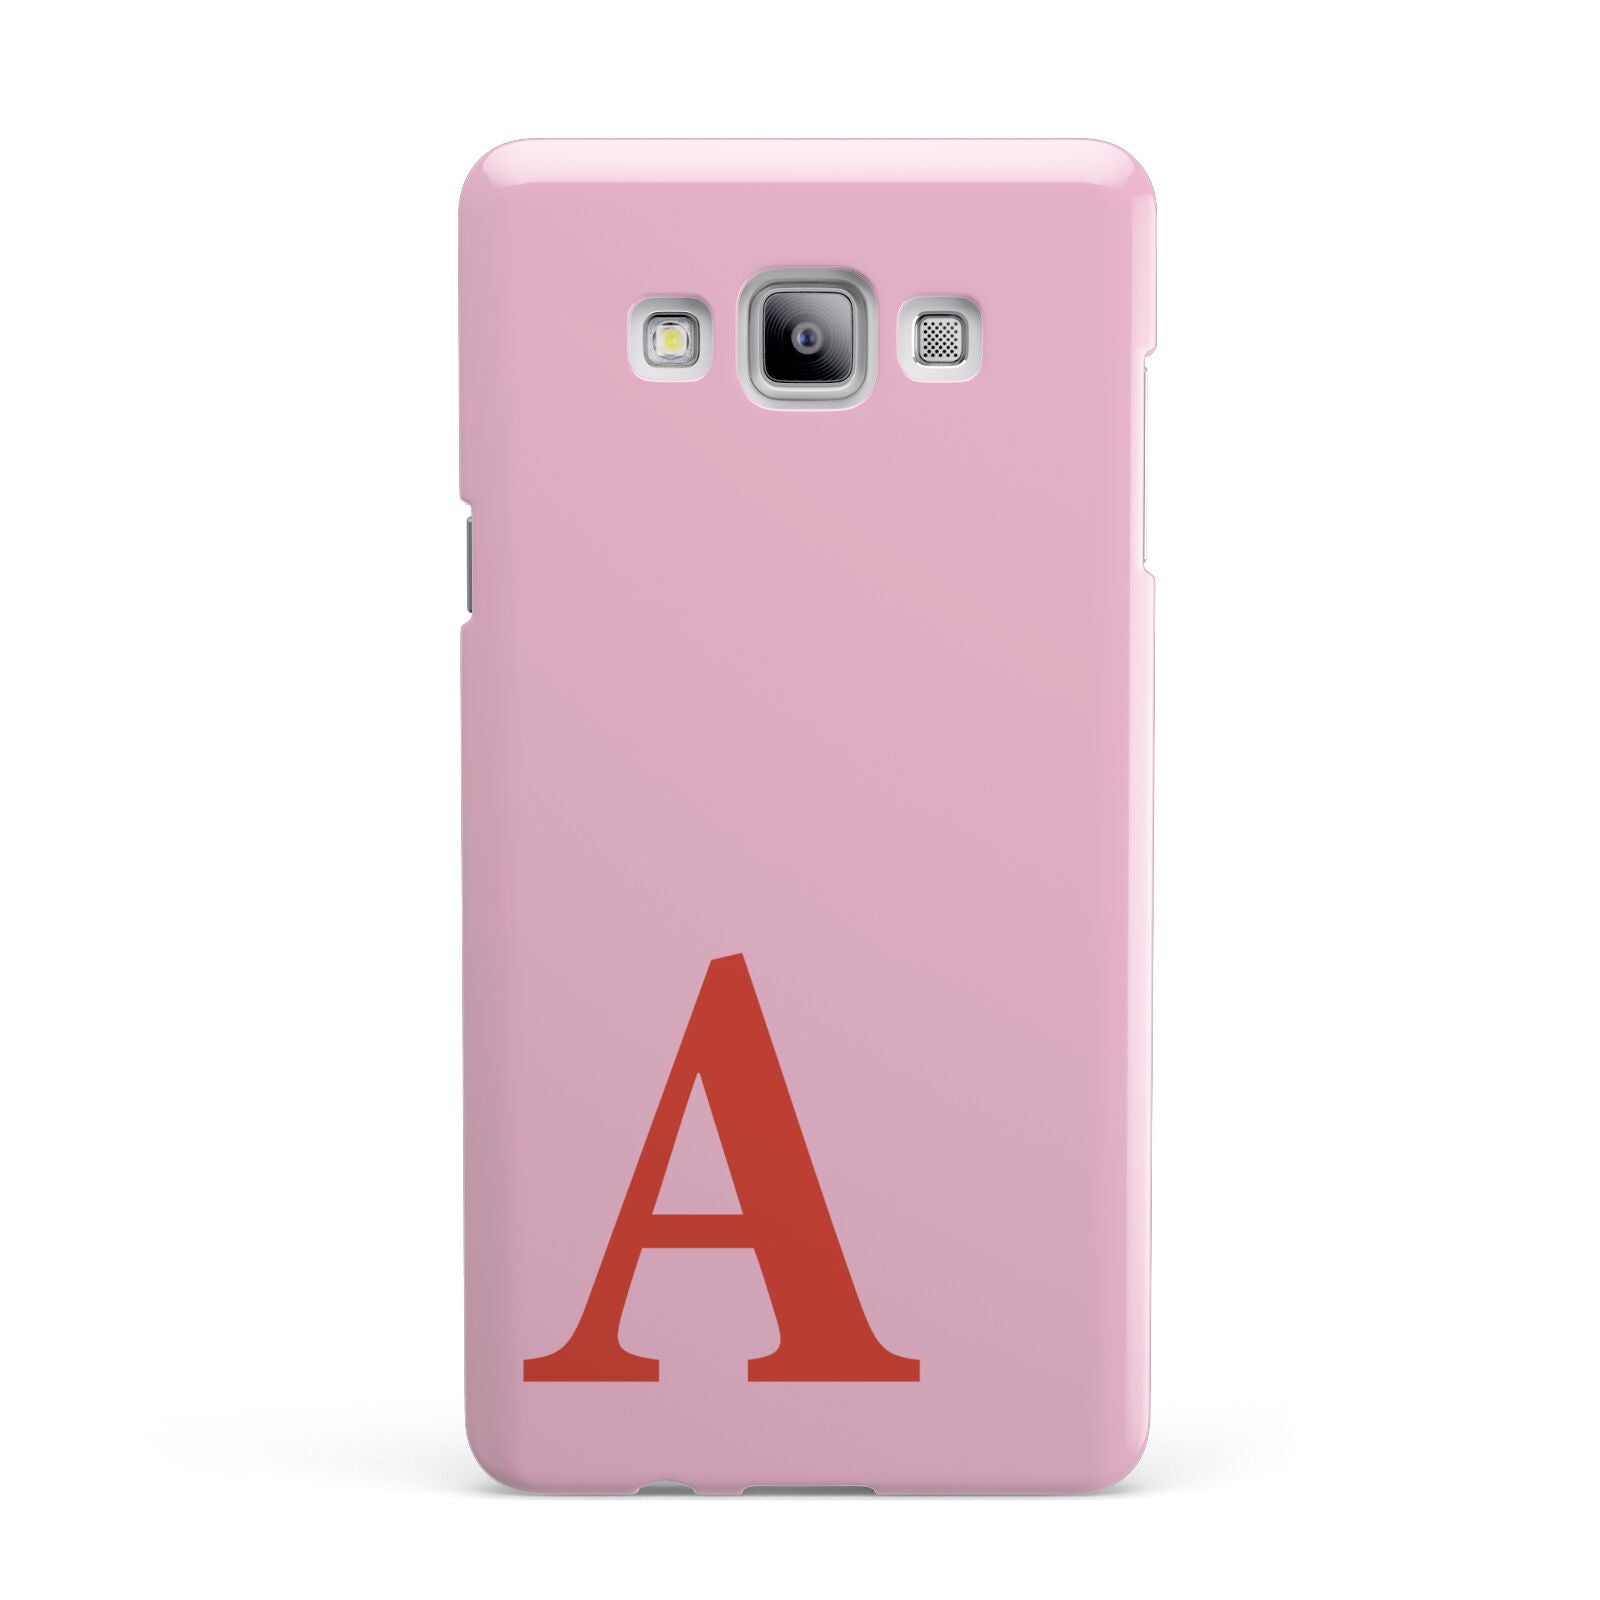 Personalised Pink and Red Samsung Galaxy A7 2015 Case